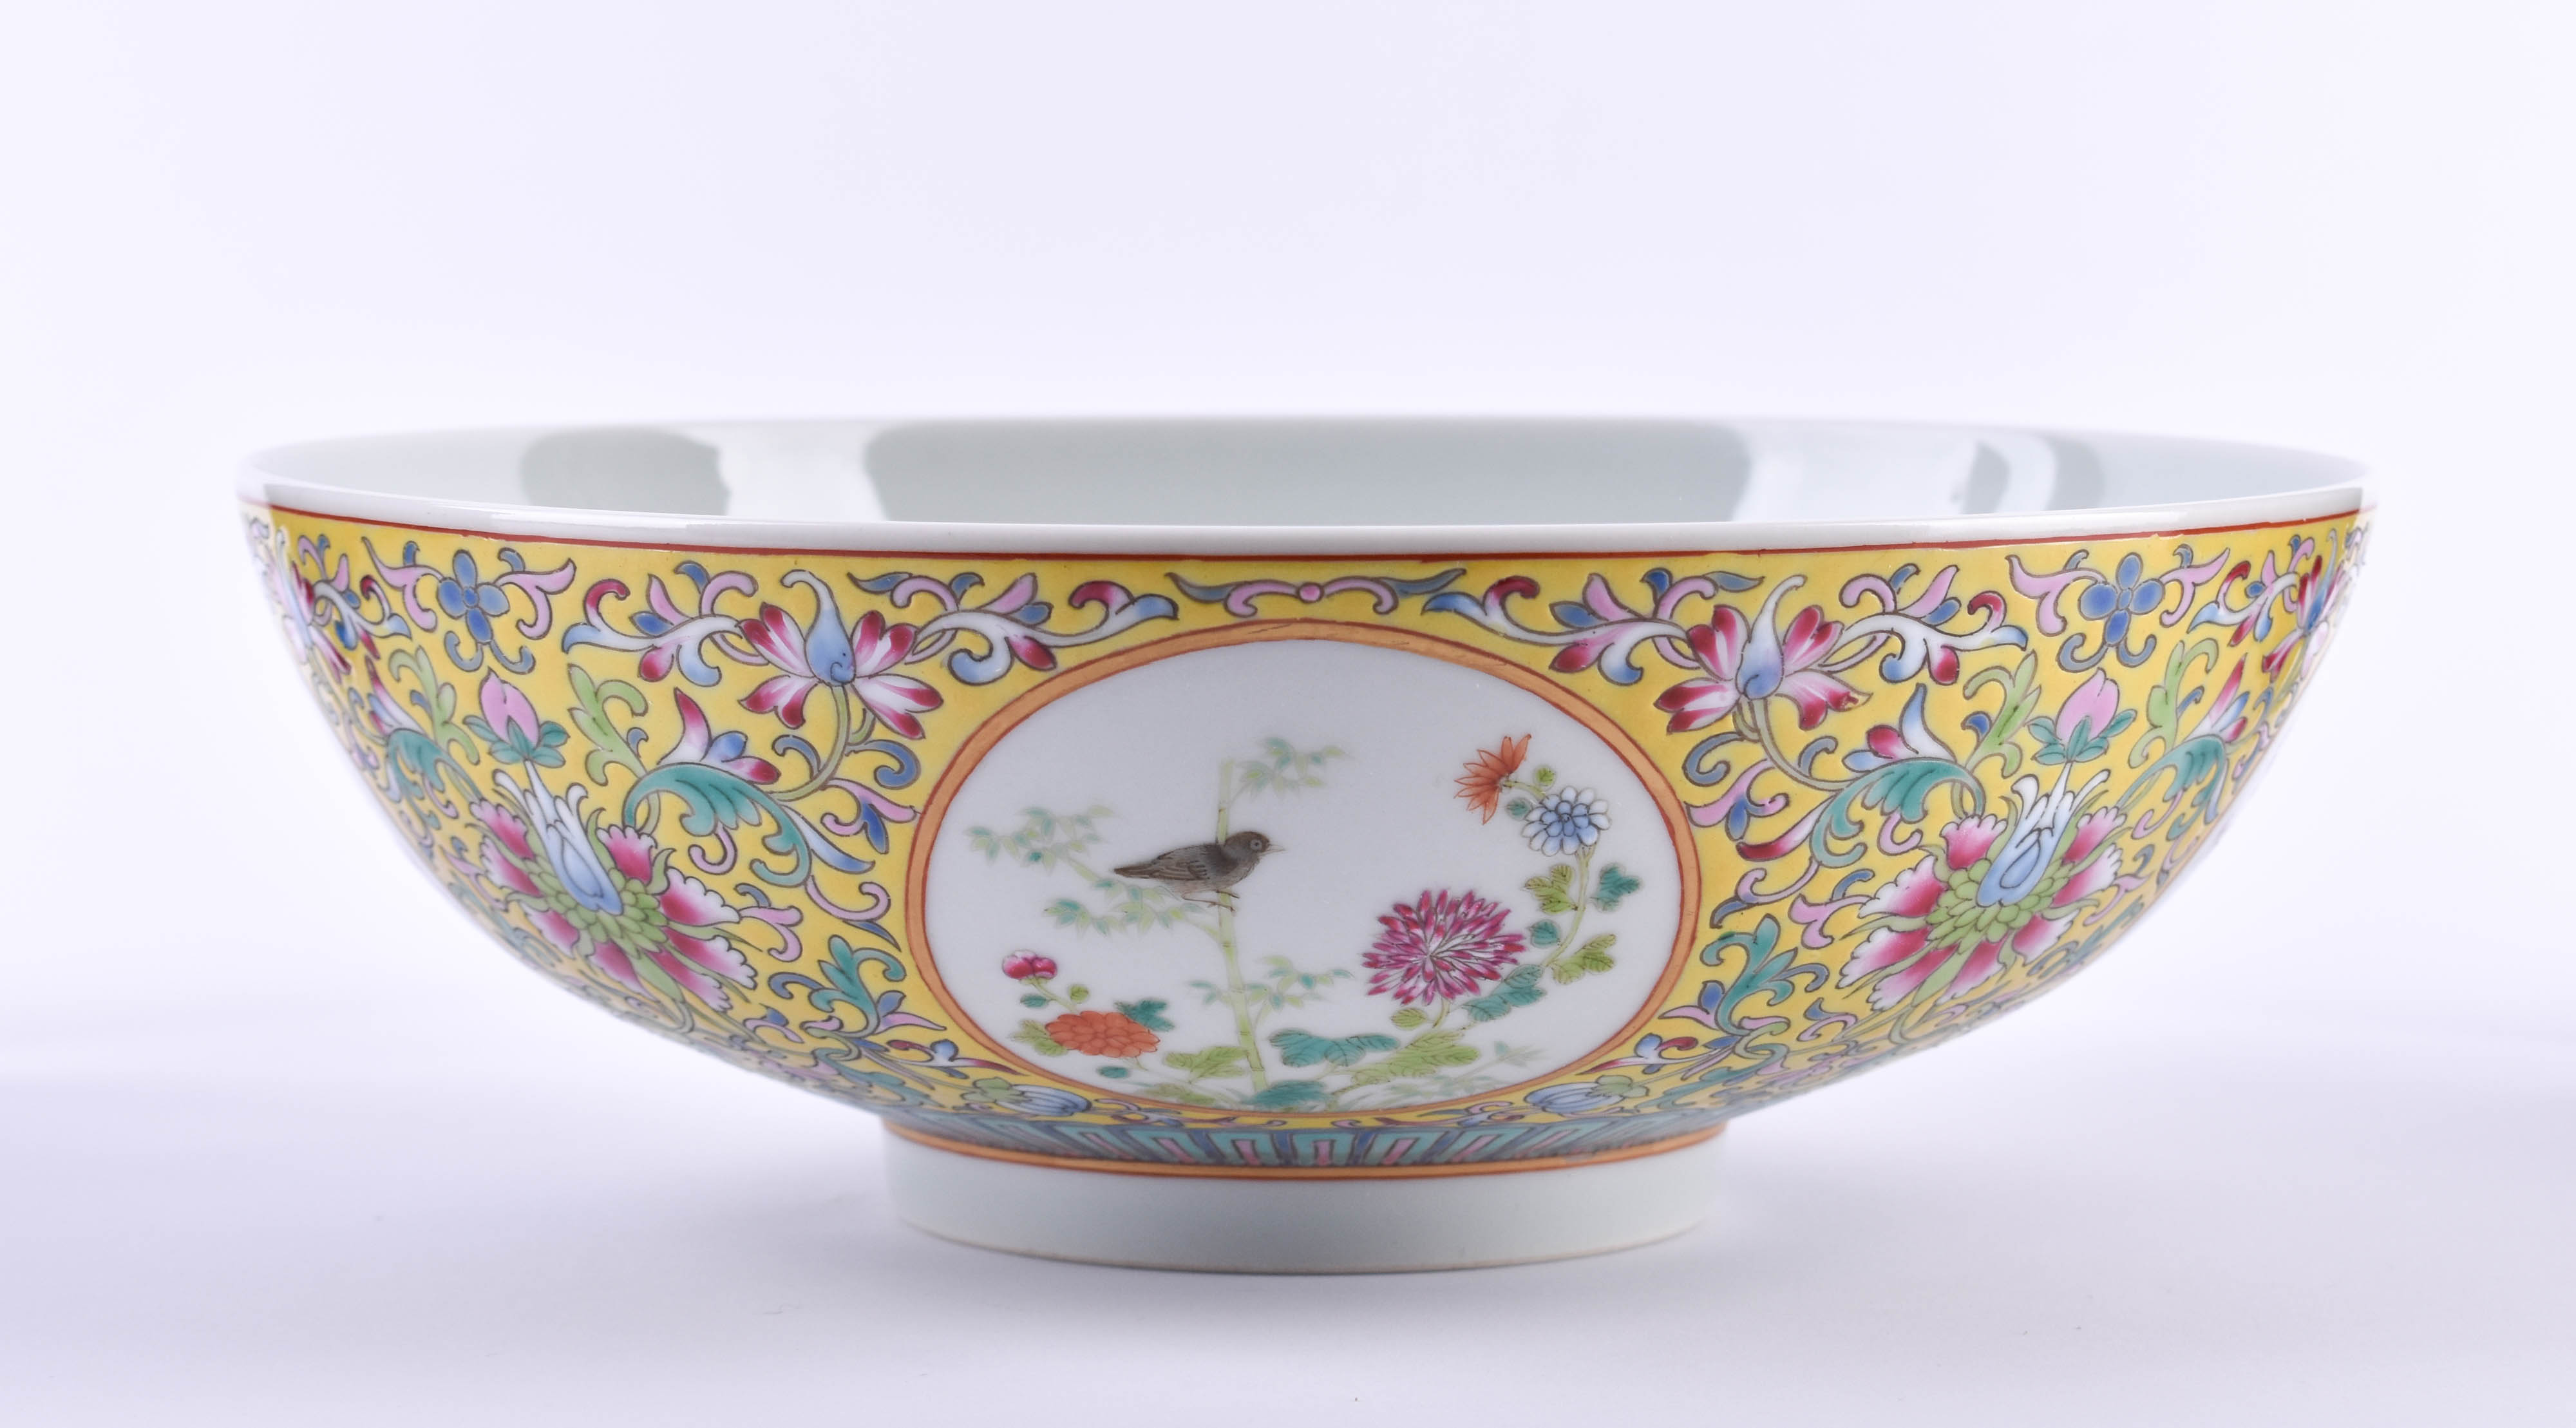  Famille rose bowl late Qing dynasty - Image 7 of 12